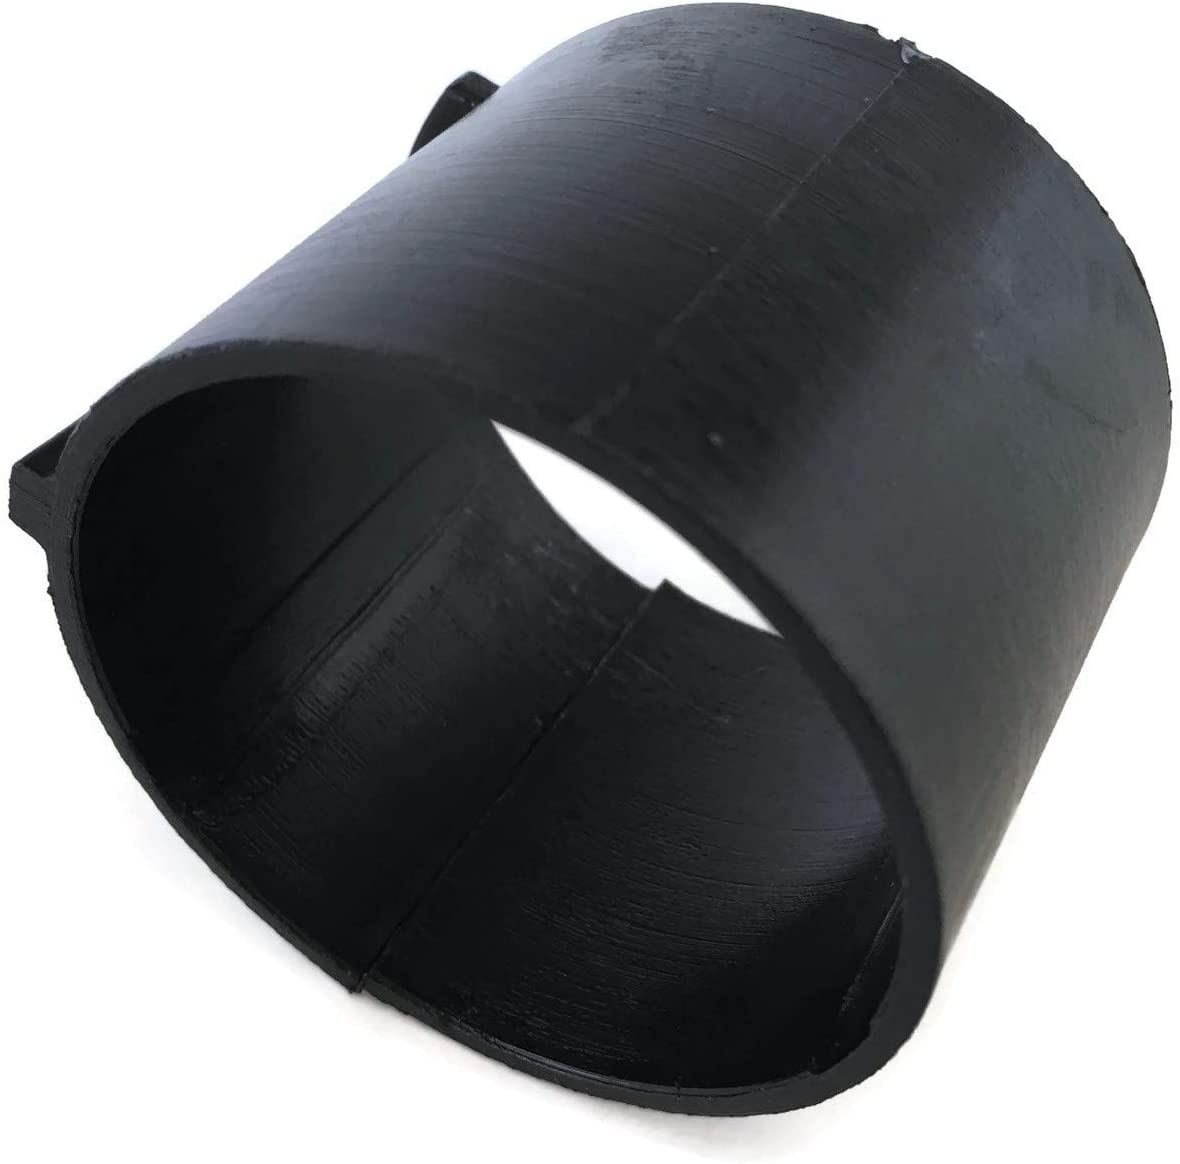 Boat 90386-52M02 Bush SPEC 'L NYLON for Yamaha Outboard Engine 20HP - 45HP 2/4T